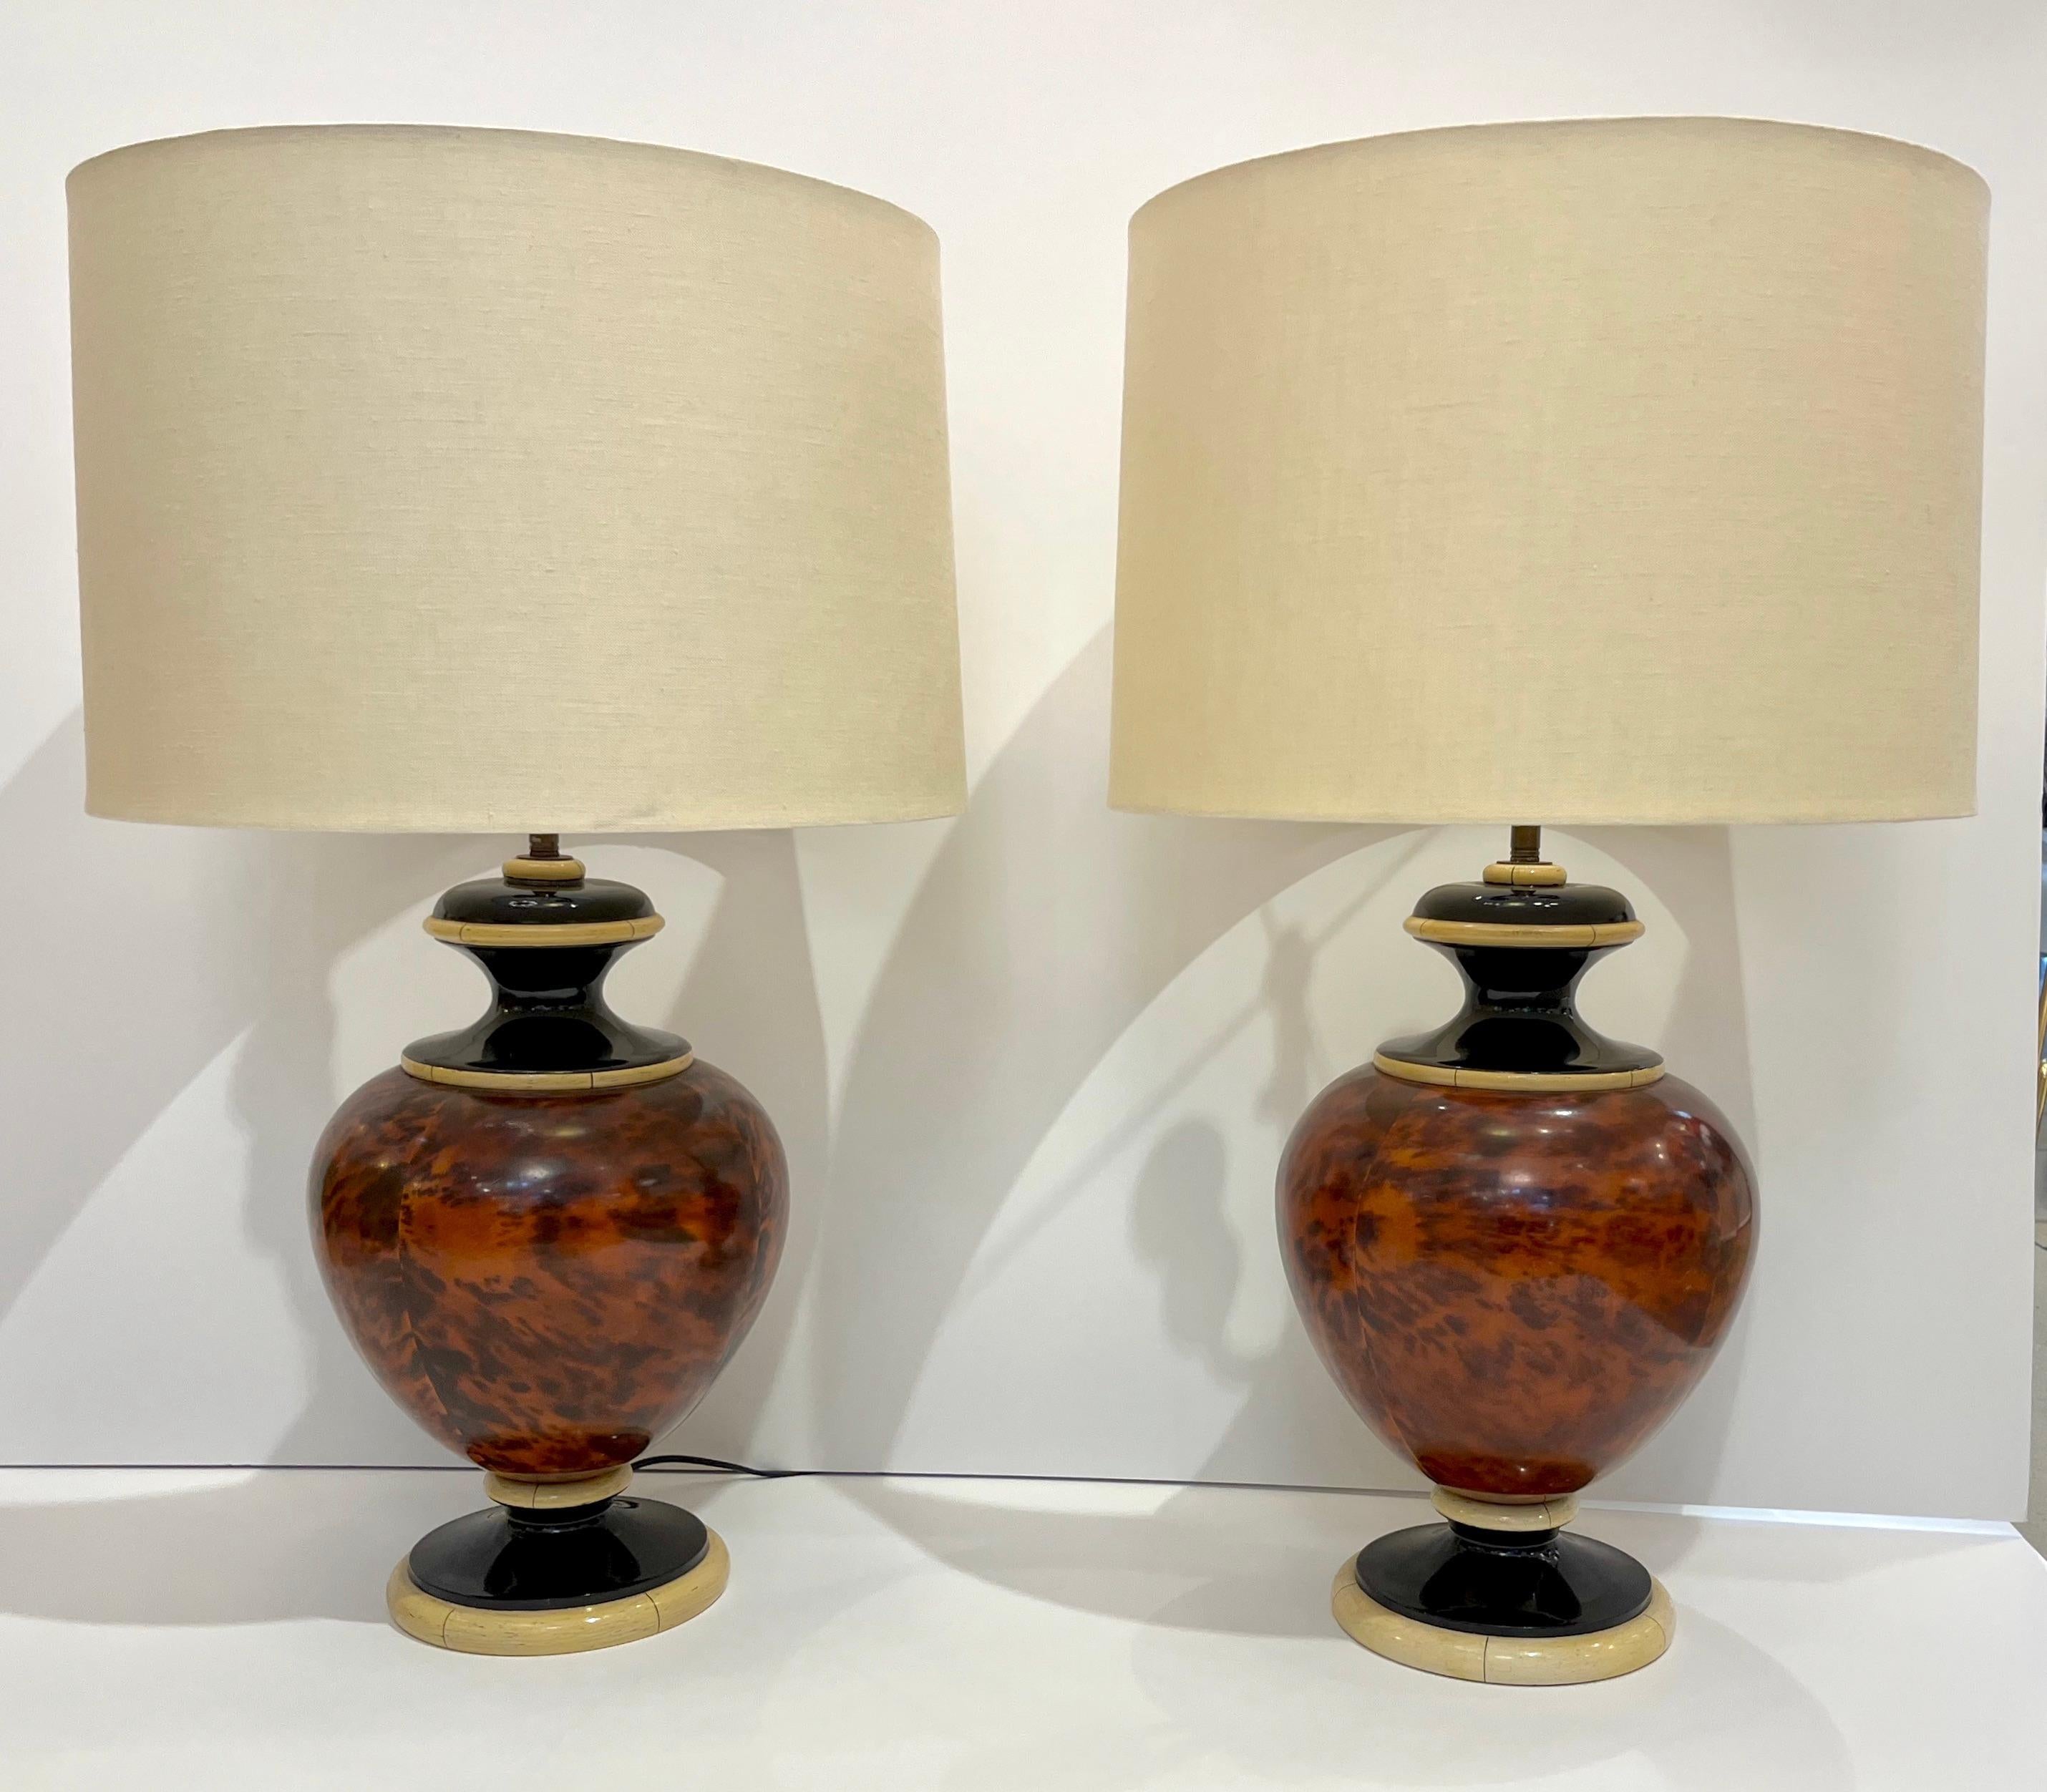 Italian Mid-Century Modern pair of 1960s vintage wood grand tour design lamps, urn-shaped, in high quality black and ivory cream lacquer boxwood, the organic turned rounded body made precious with attractive walnut veneer and highlighted with black